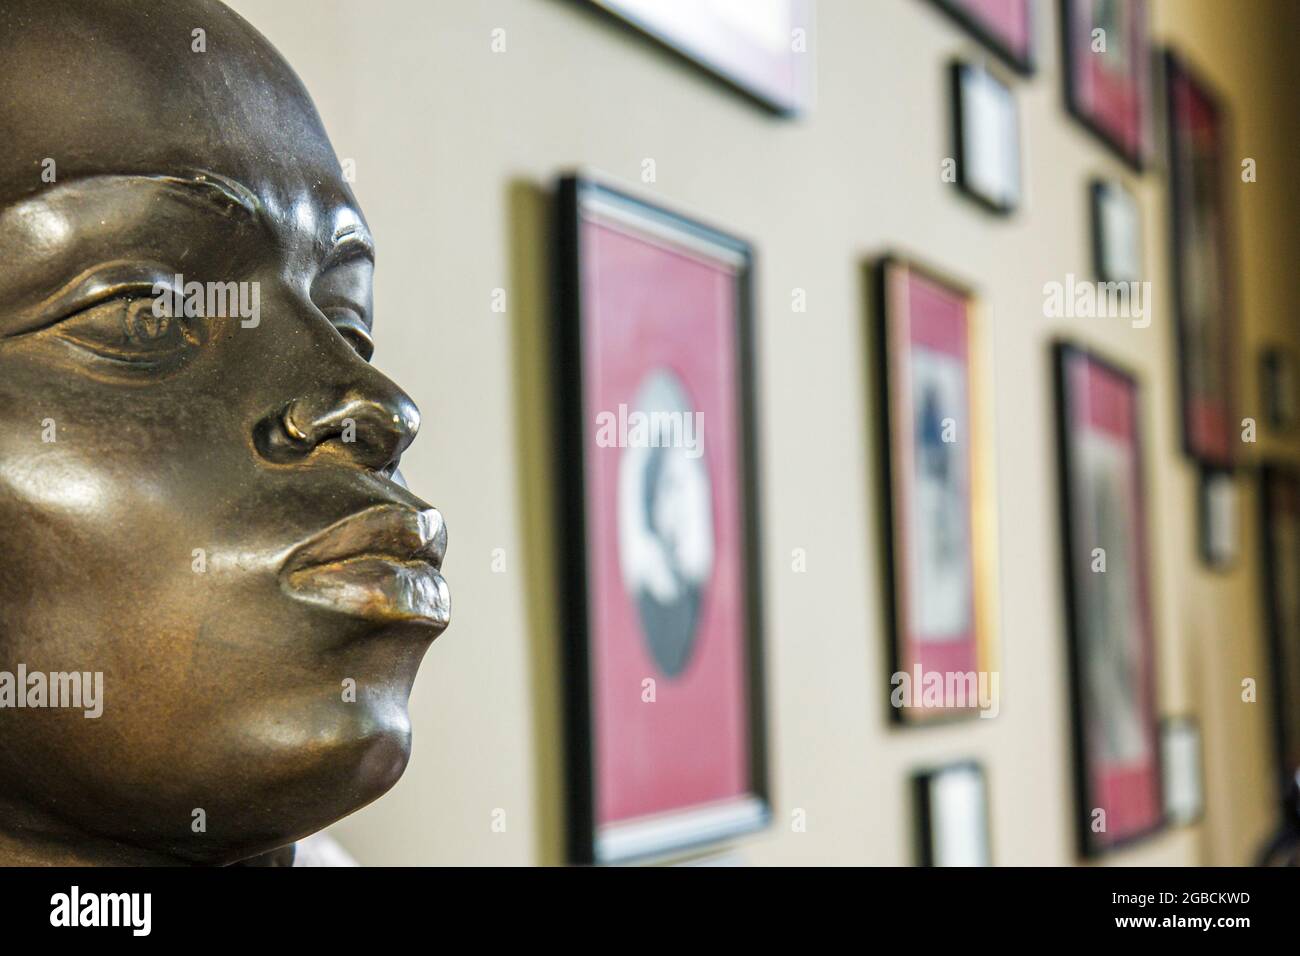 Alabama Selma, National Voting Rights Museum & Institute, Civil Rights Movement, Black History Bust Face Exhibition Collection, Foto Stock